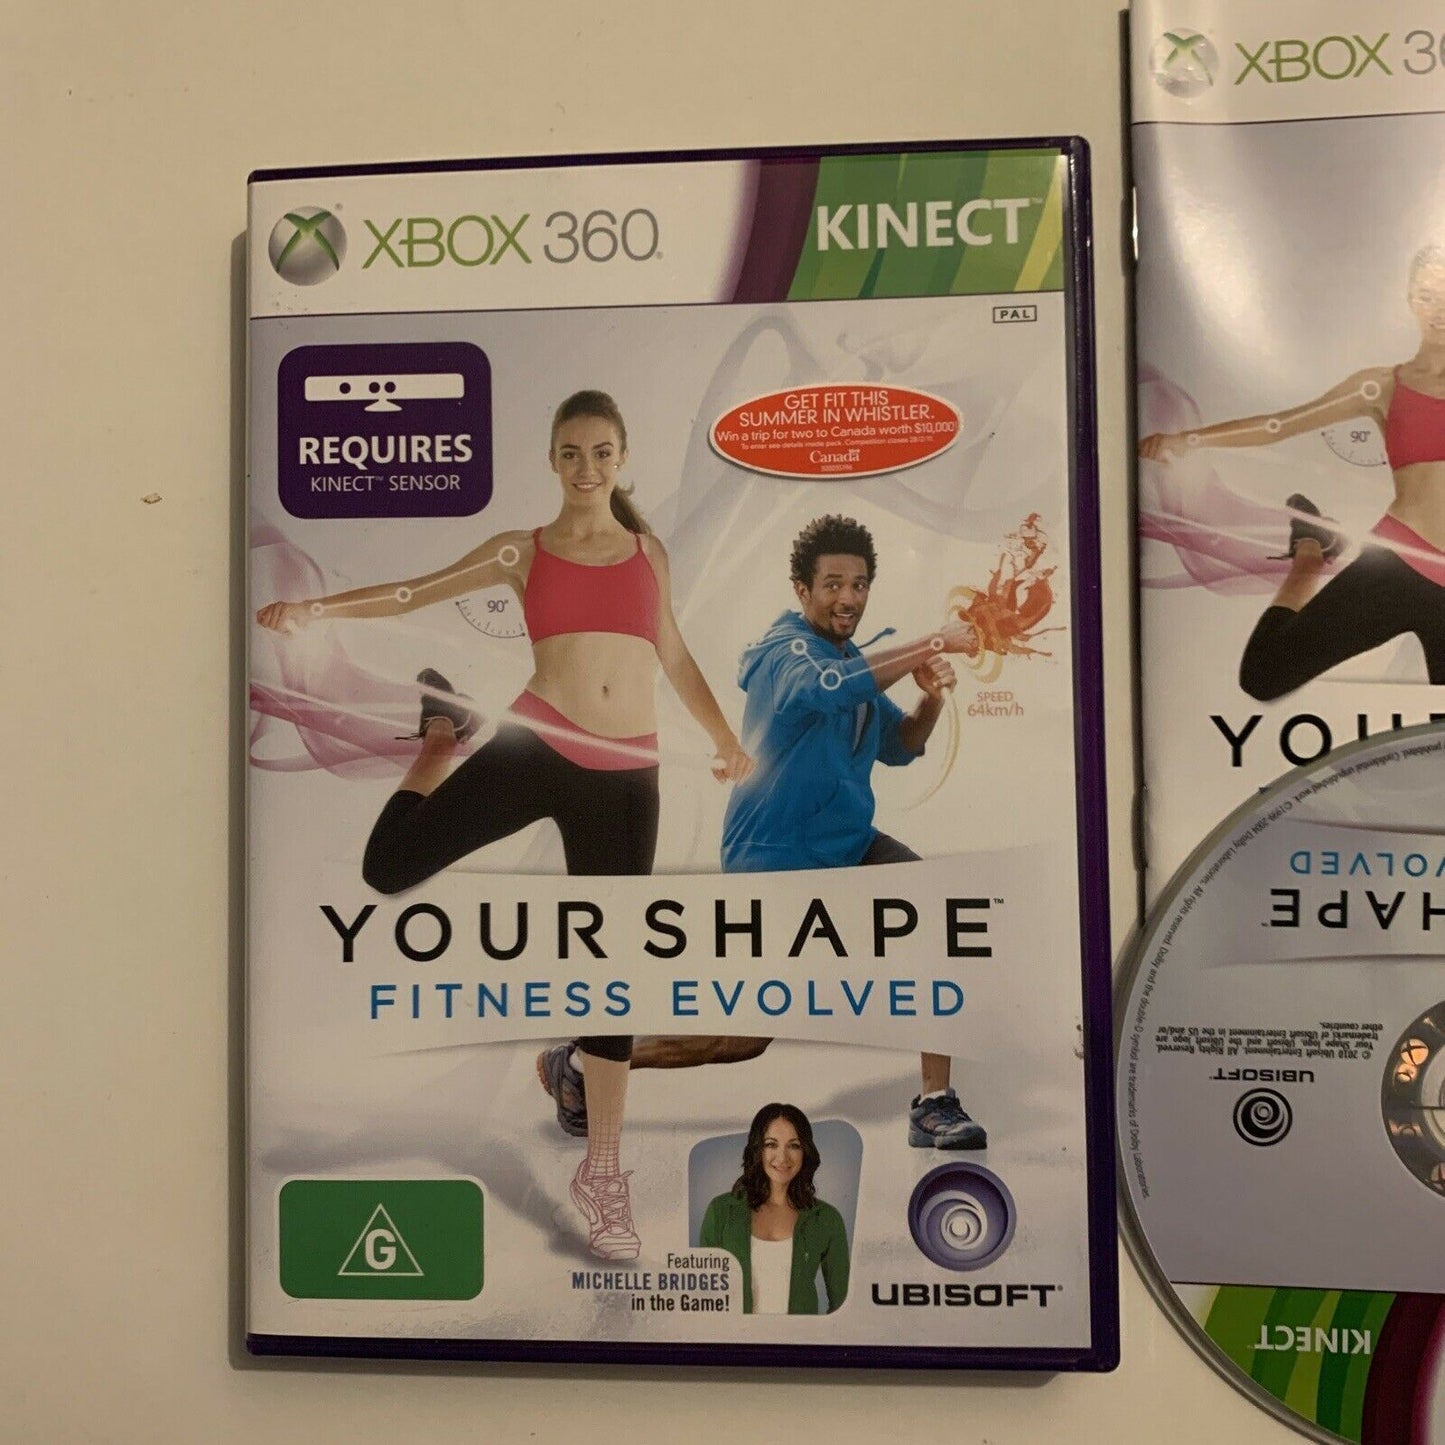 Your Shape Fitness Evolved (Kinect) Microsoft XBOX 360 with Manual PAL